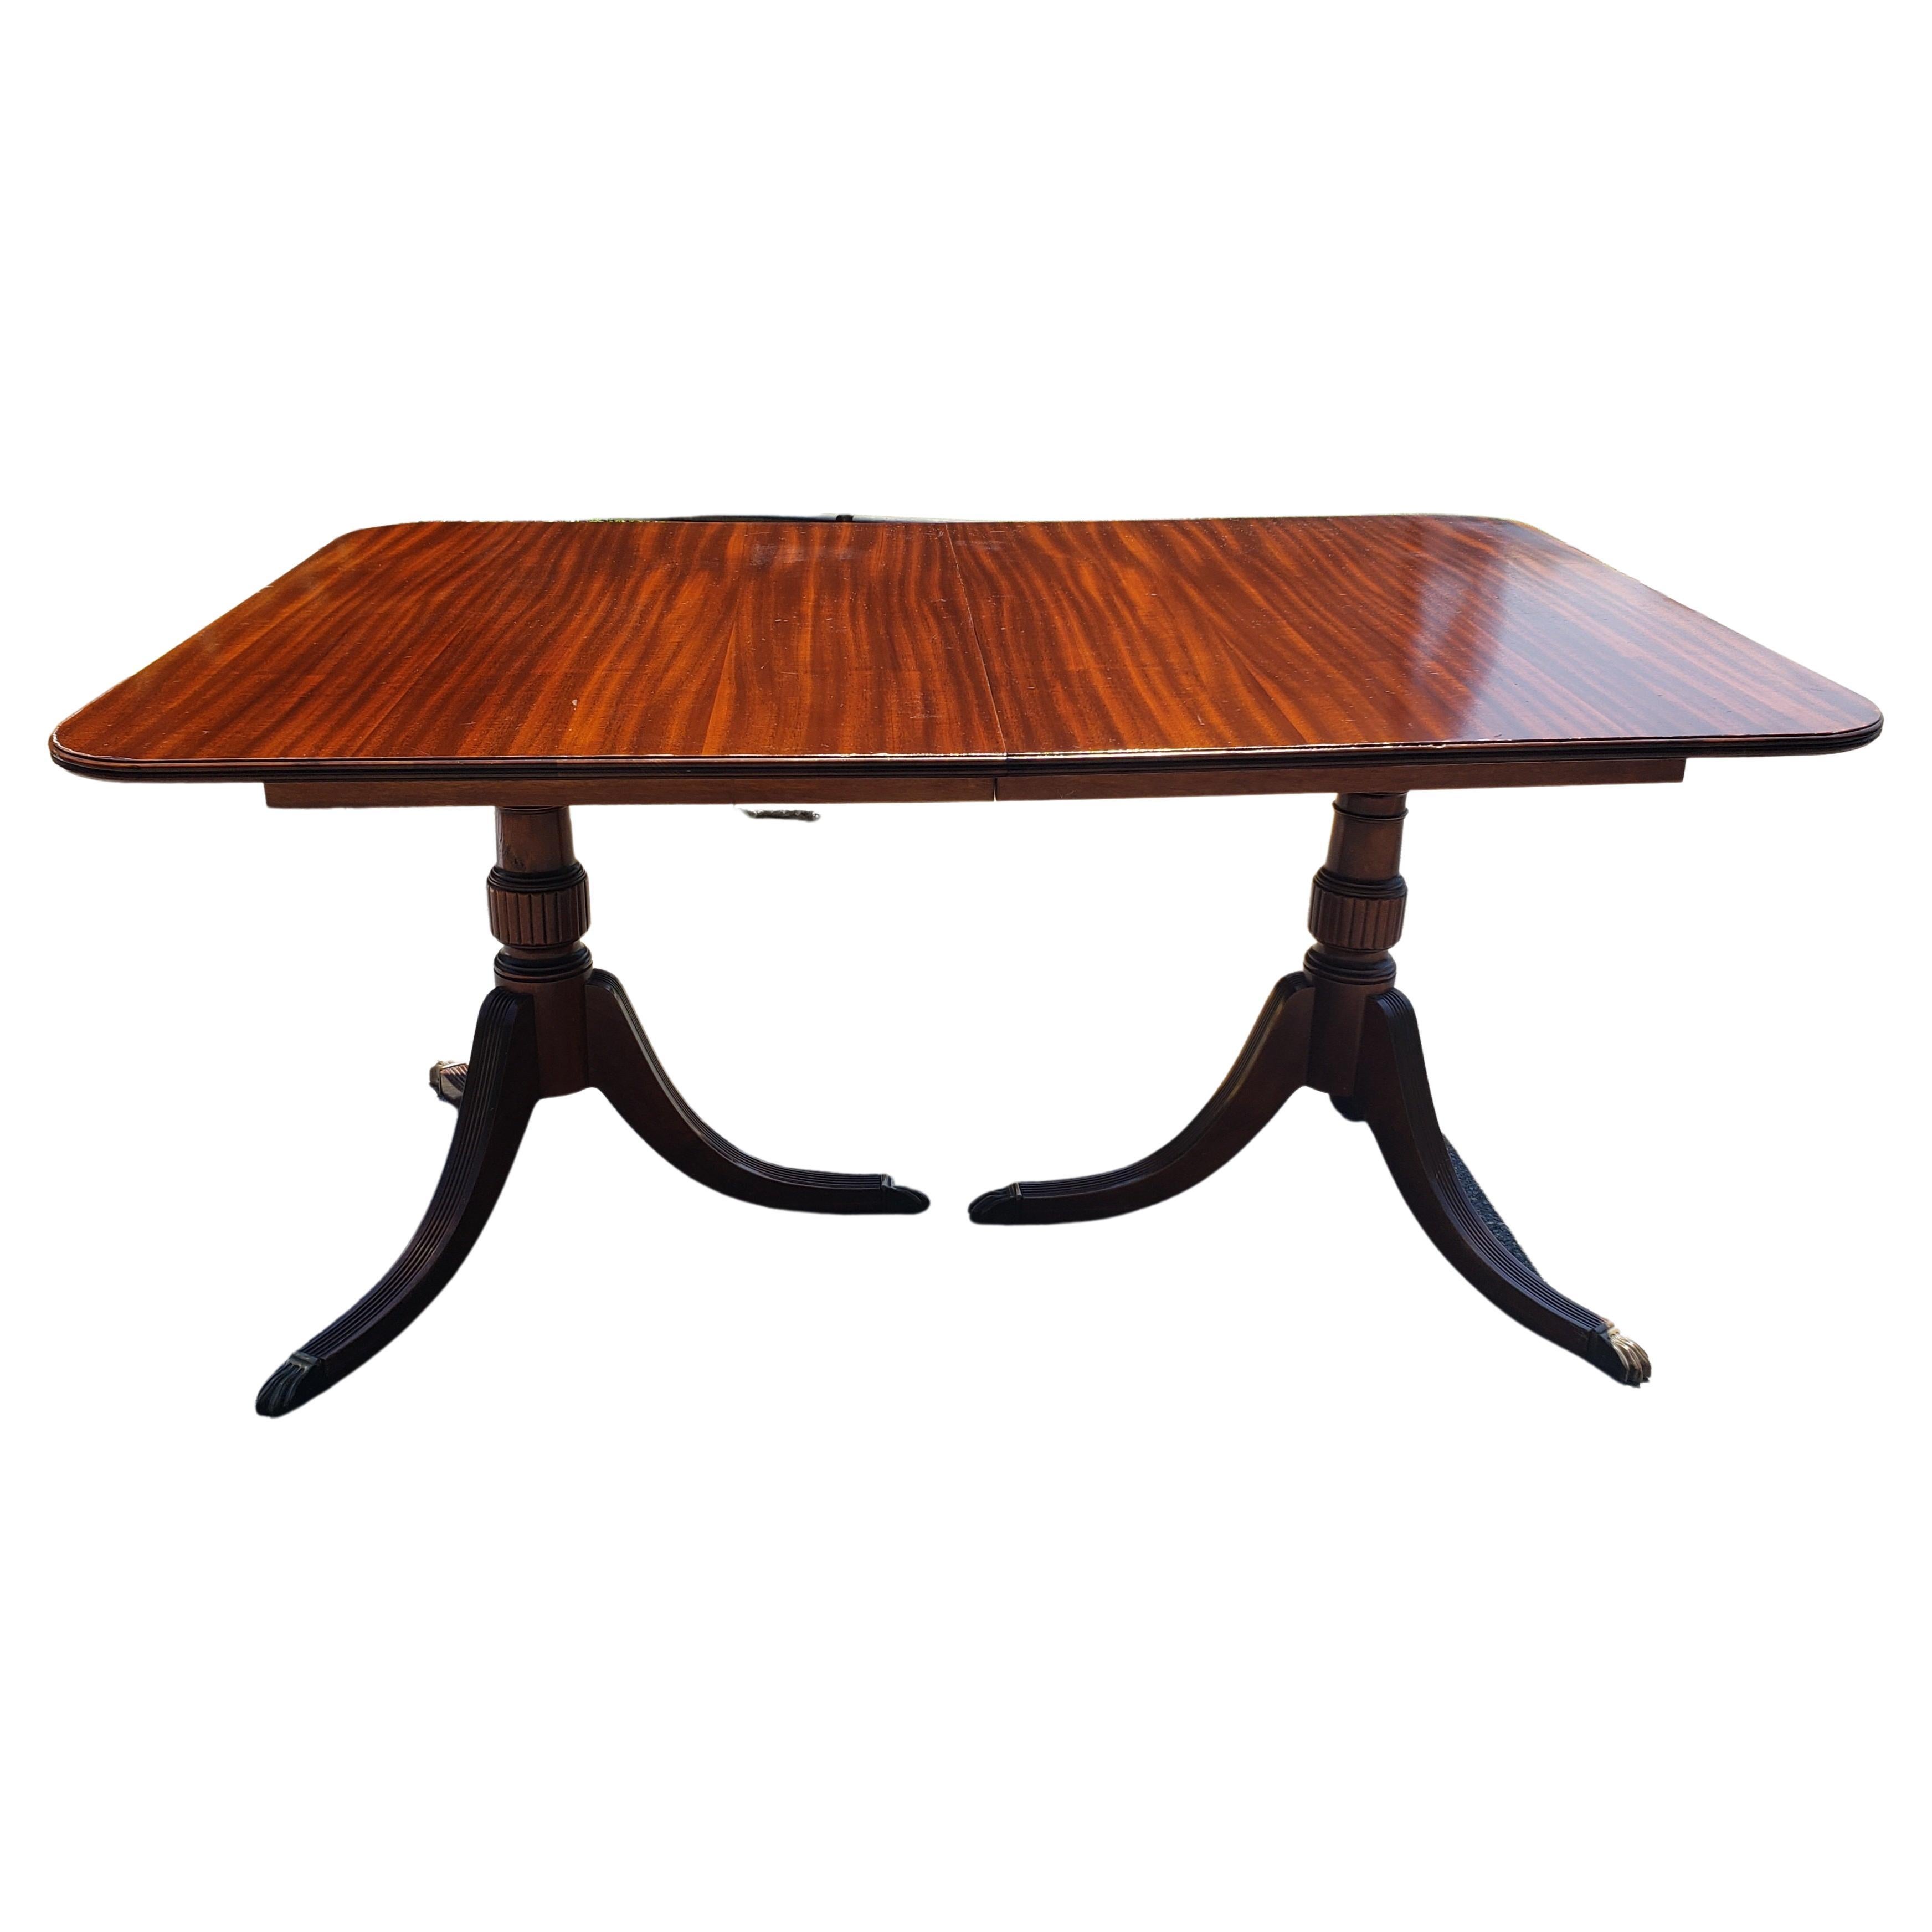 A Georgian style double pedestal mahogany dining table. Tripod pedestal with brass paw feet. Nice genuine mahogany patina stripes. Measures 62 inches in width, 42 inches in depth and stands 30 inches high. Good vintage condition.